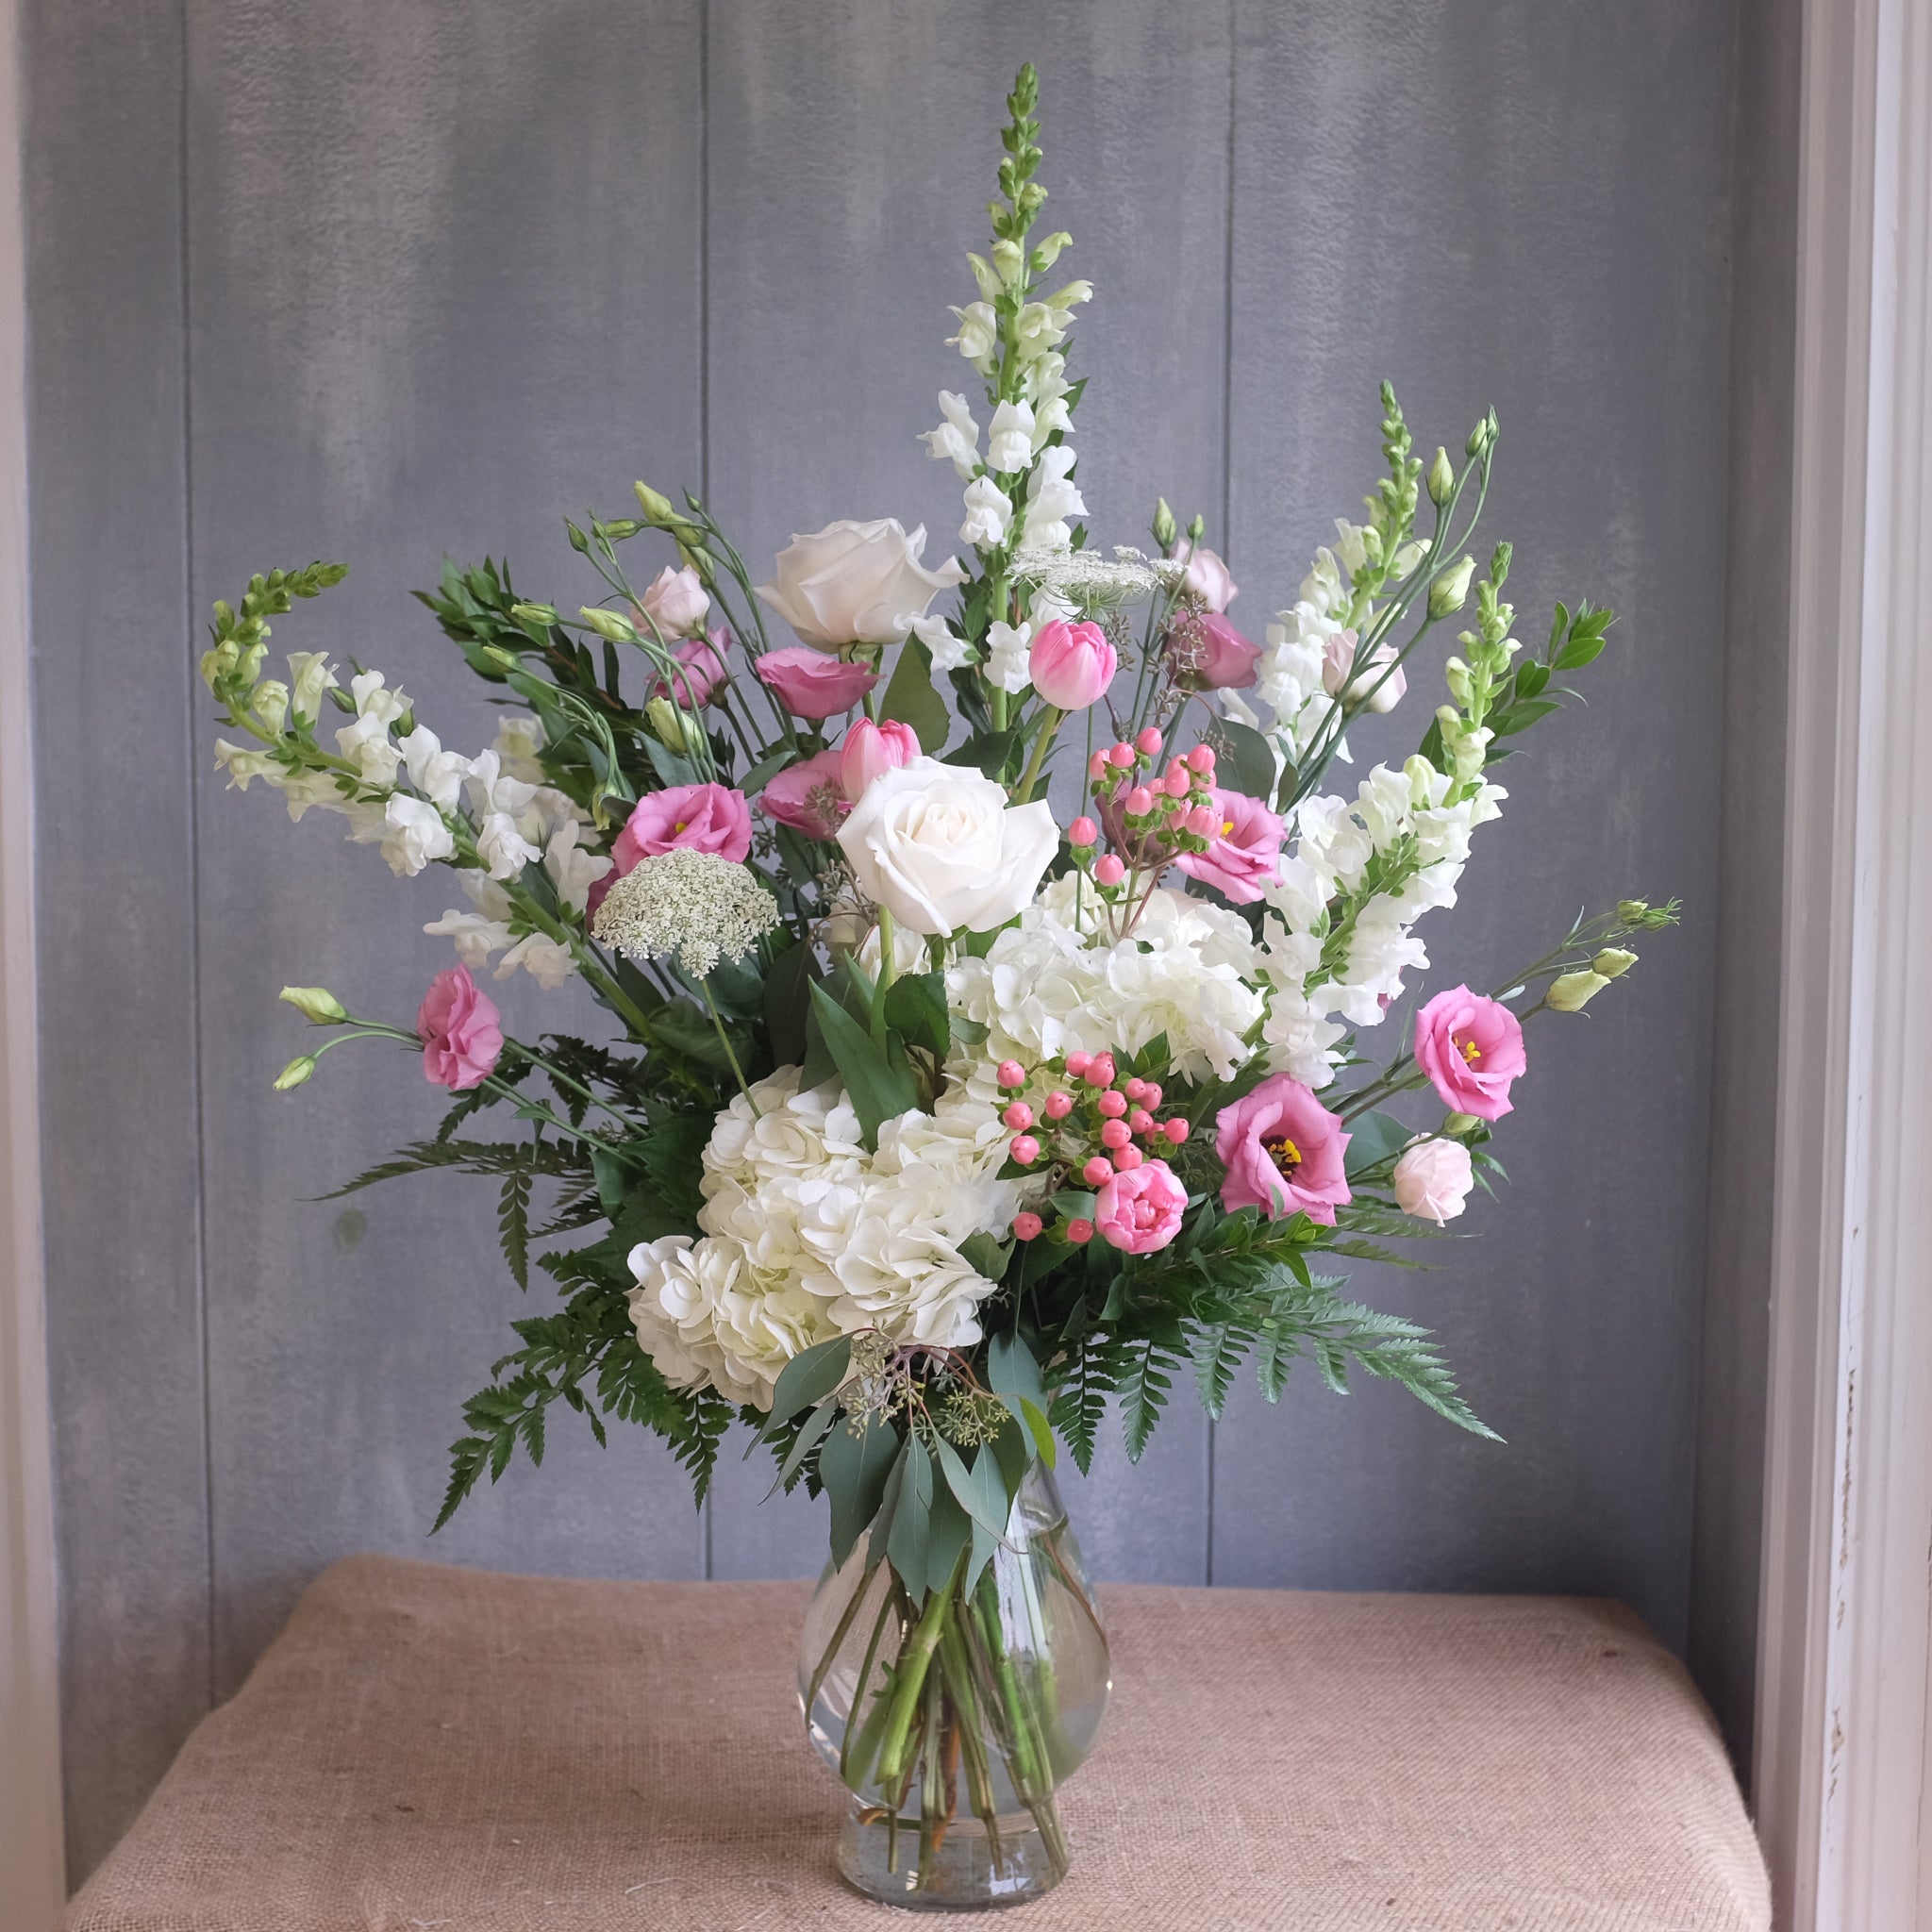 tall and elegant floral arrangement with roses, lisianthus, hydrangea, and stock by Michler's Florist in Lexington, KY